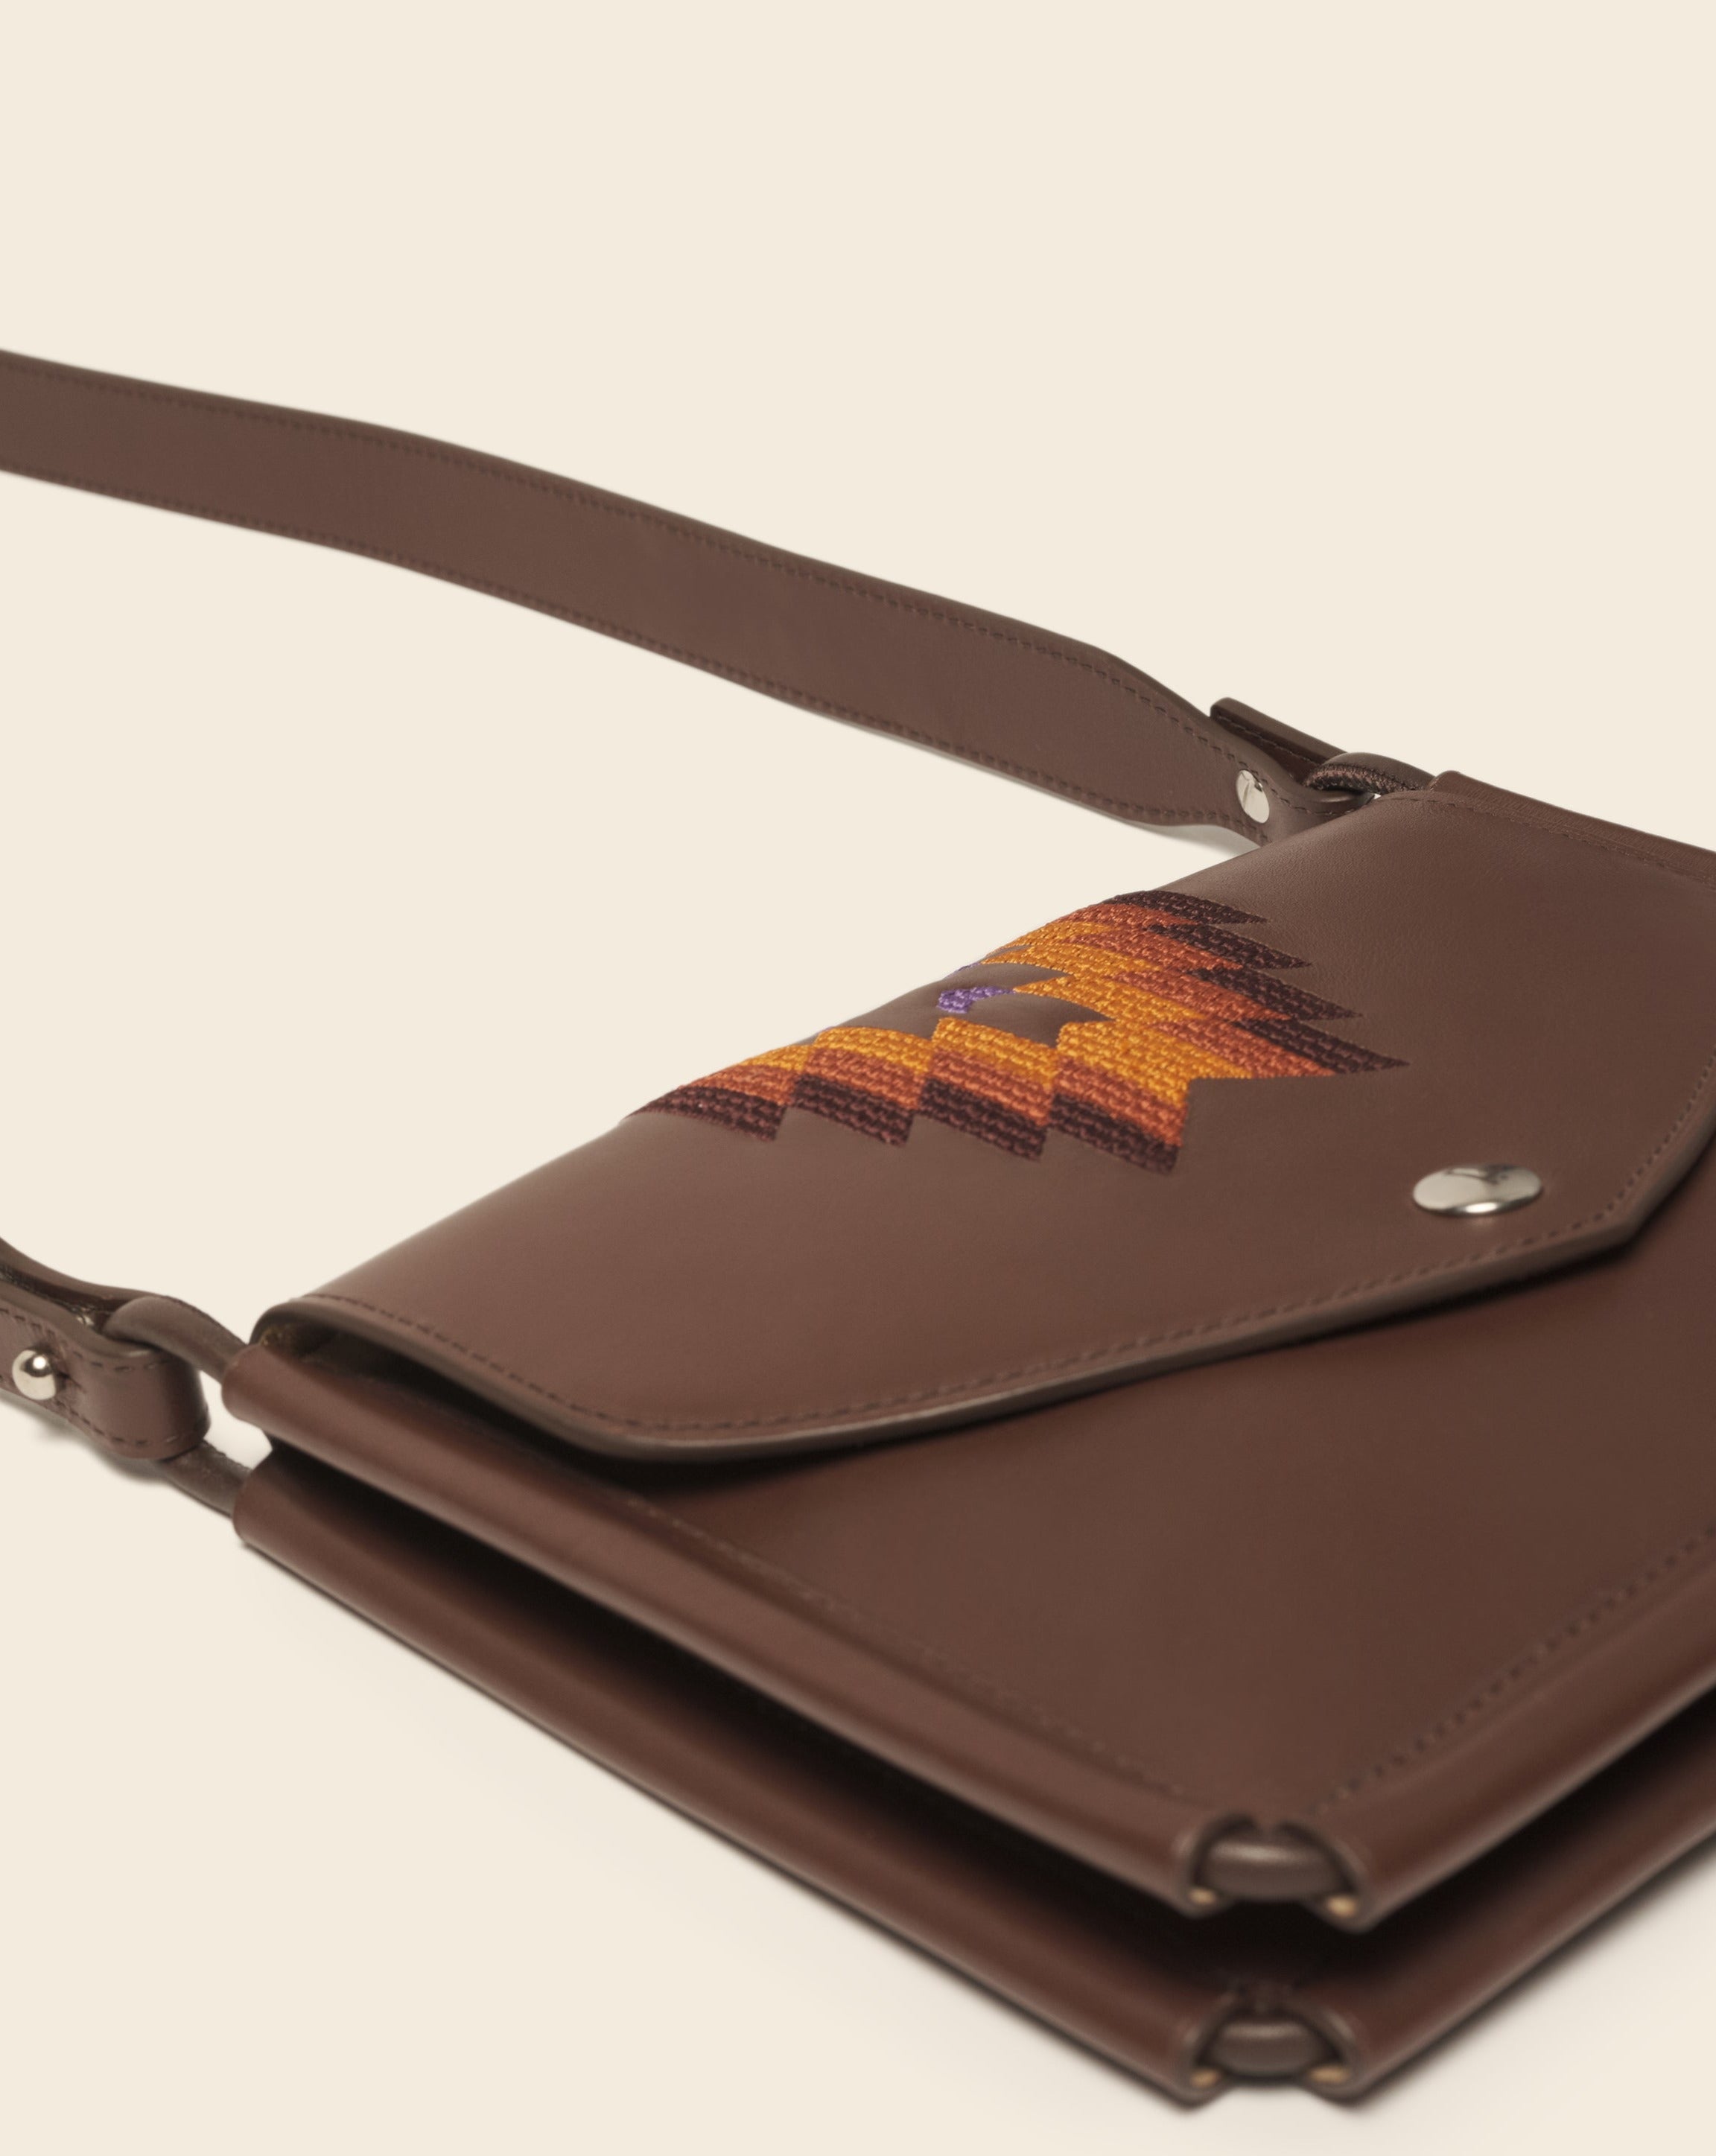 KANSAS - Leather duo pouch bag - Brown leather & multicolored embroidery